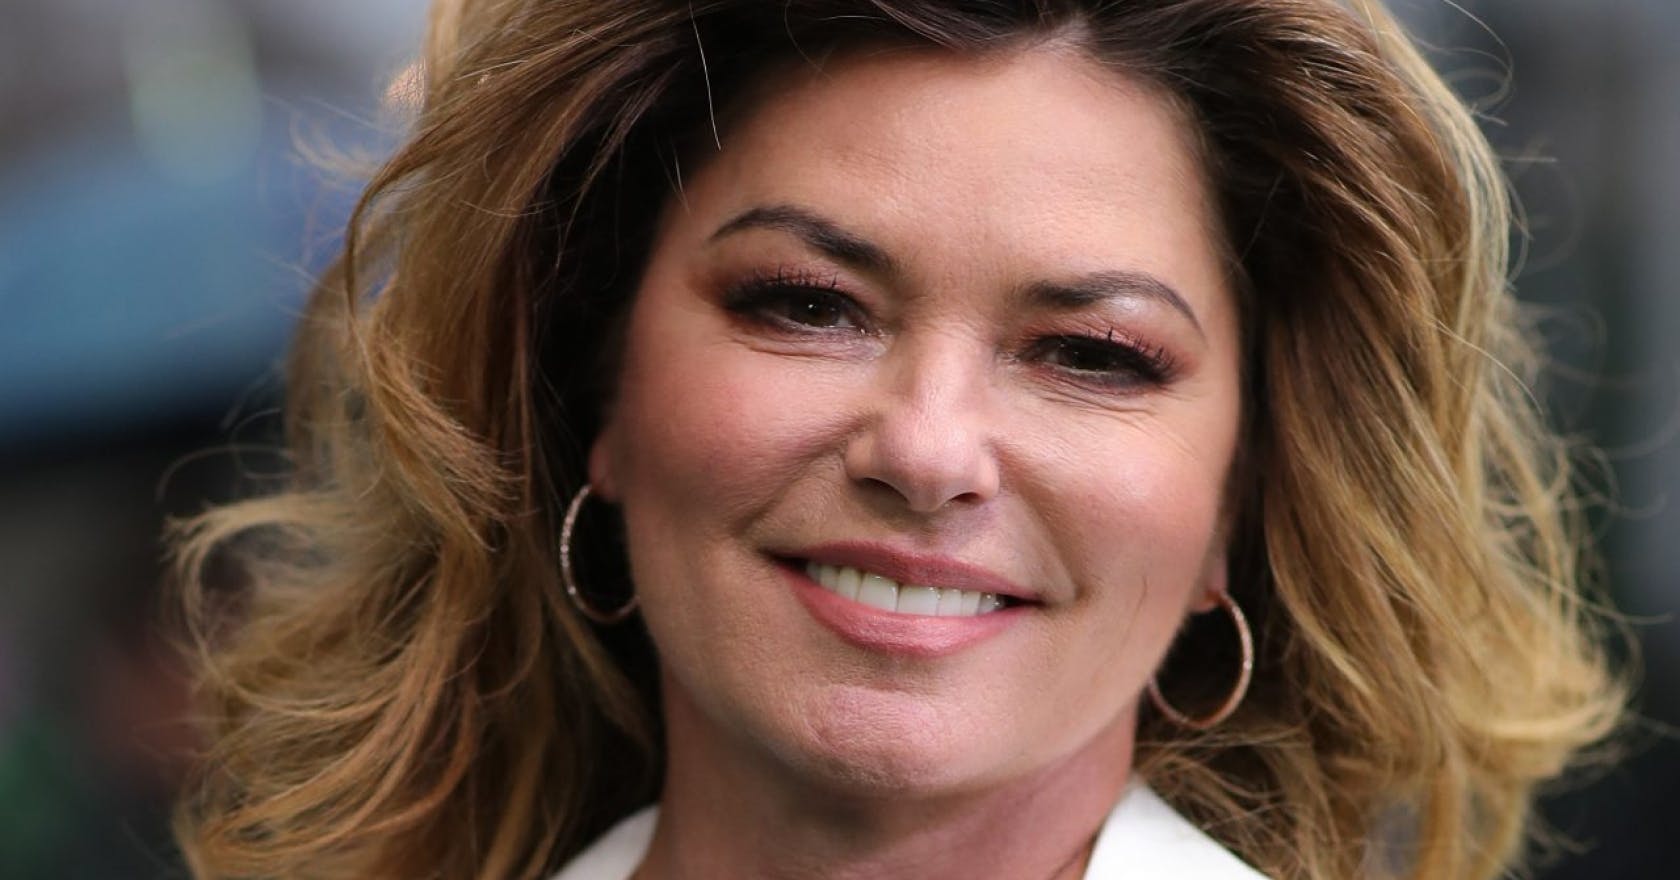 Shania Twain was told she’d be “hated by women” for this reason